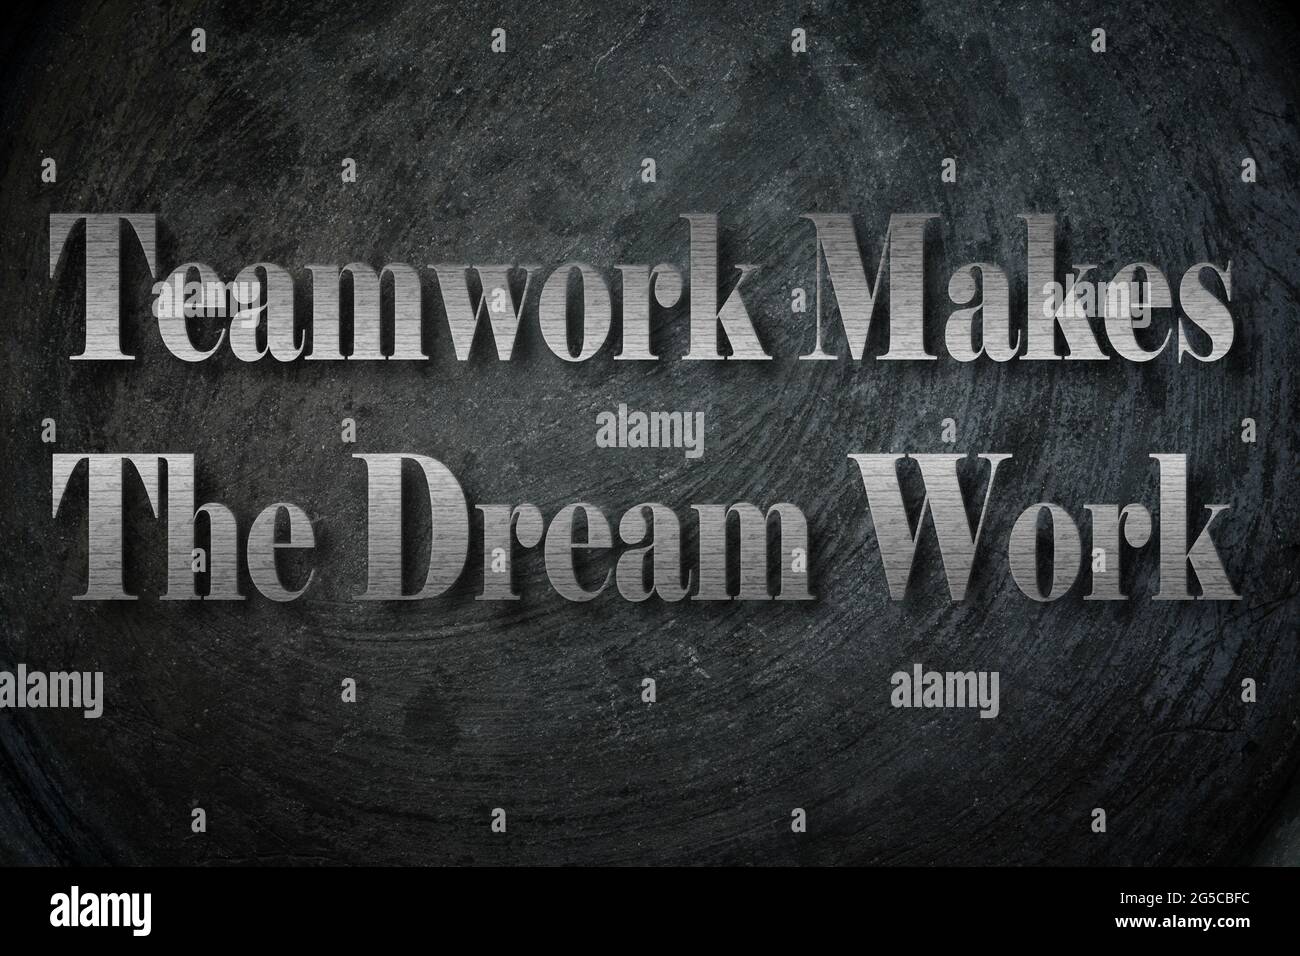 Teamwork Makes The Dream Work text on Background Stock Photo